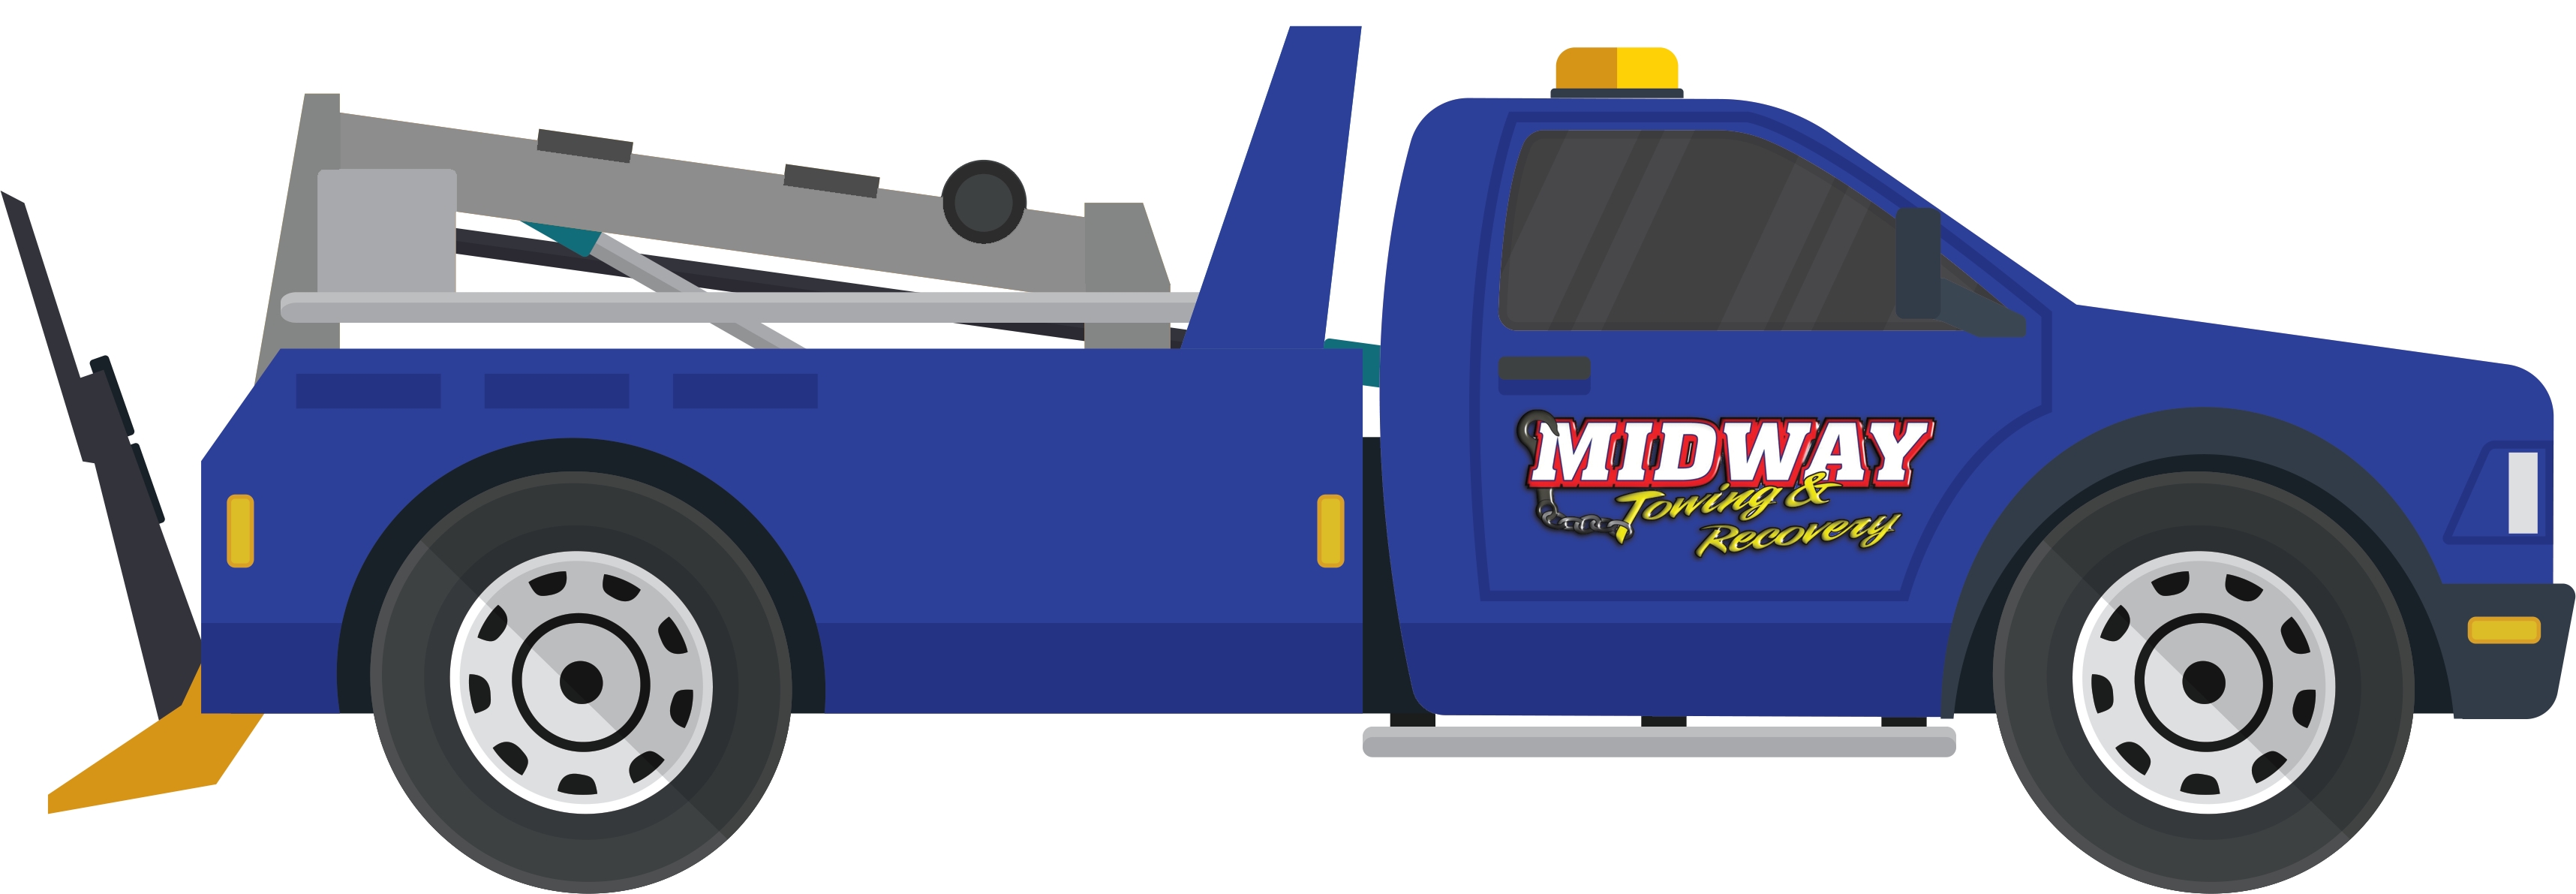 Midway Towing & Recovery stands ready to help you whenever motorhome towing in the Richmond, Virginia area is needed.